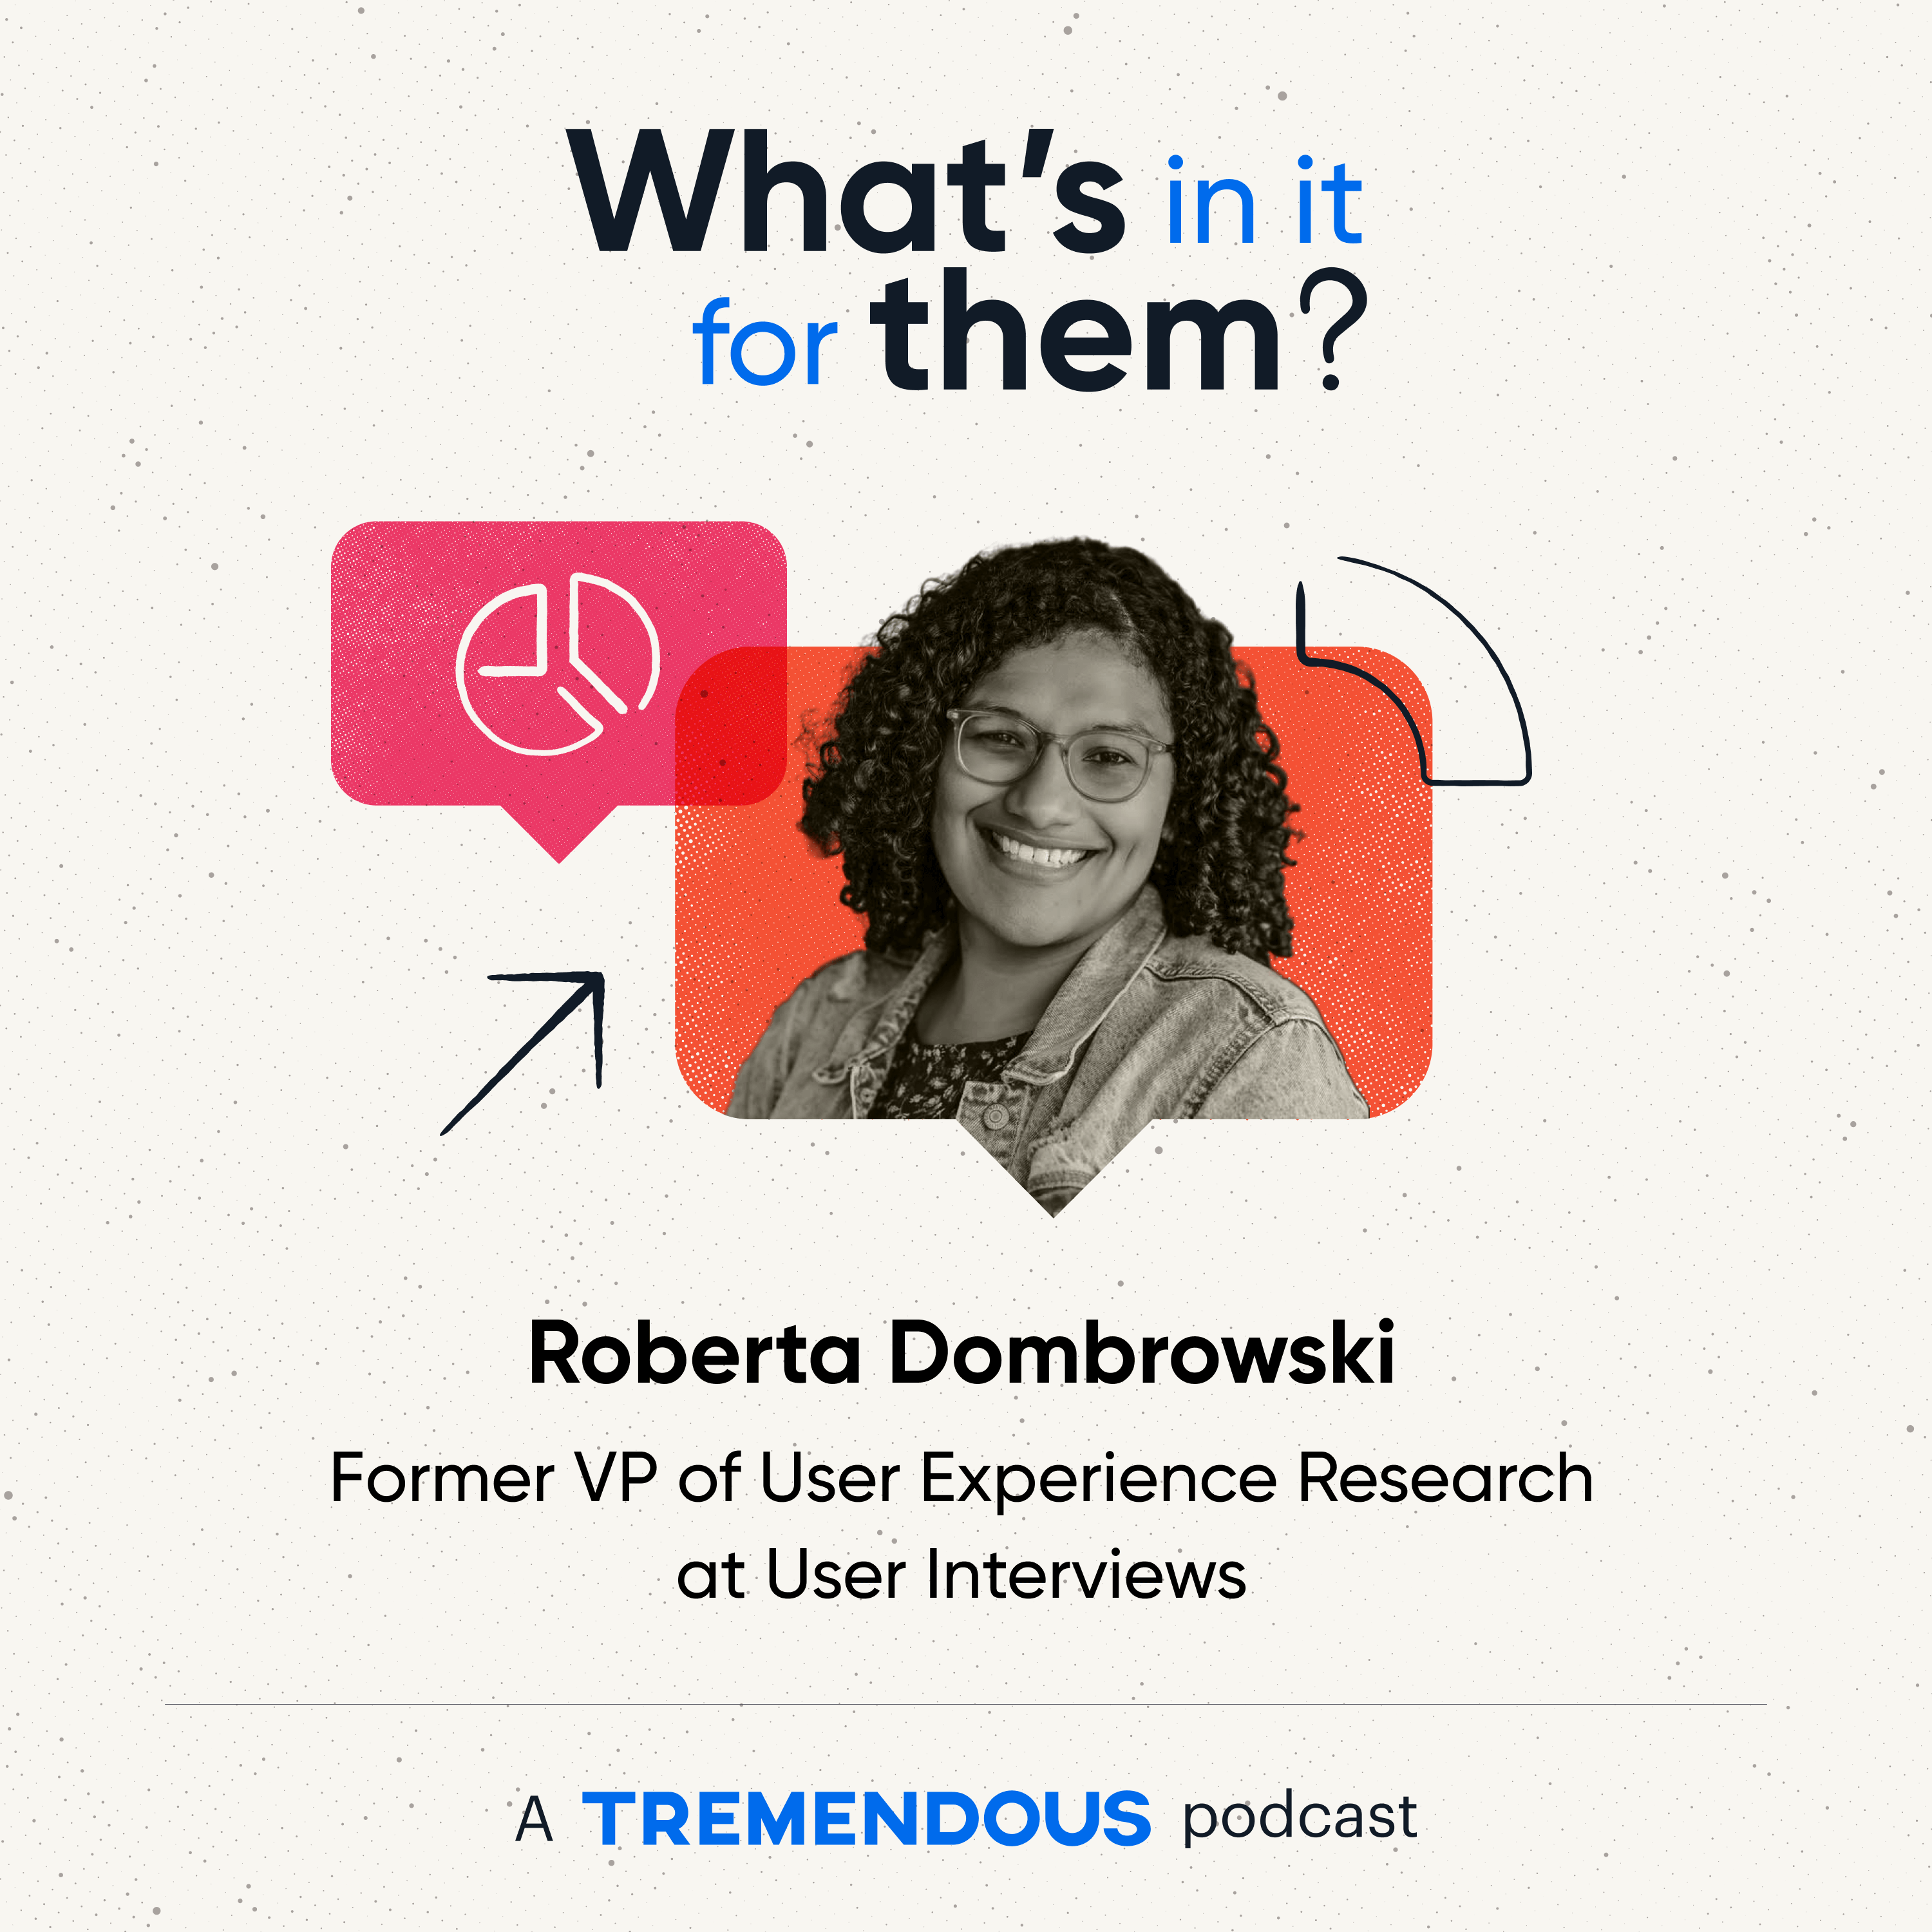 Roberta Dombrowski on What's In It for Them?